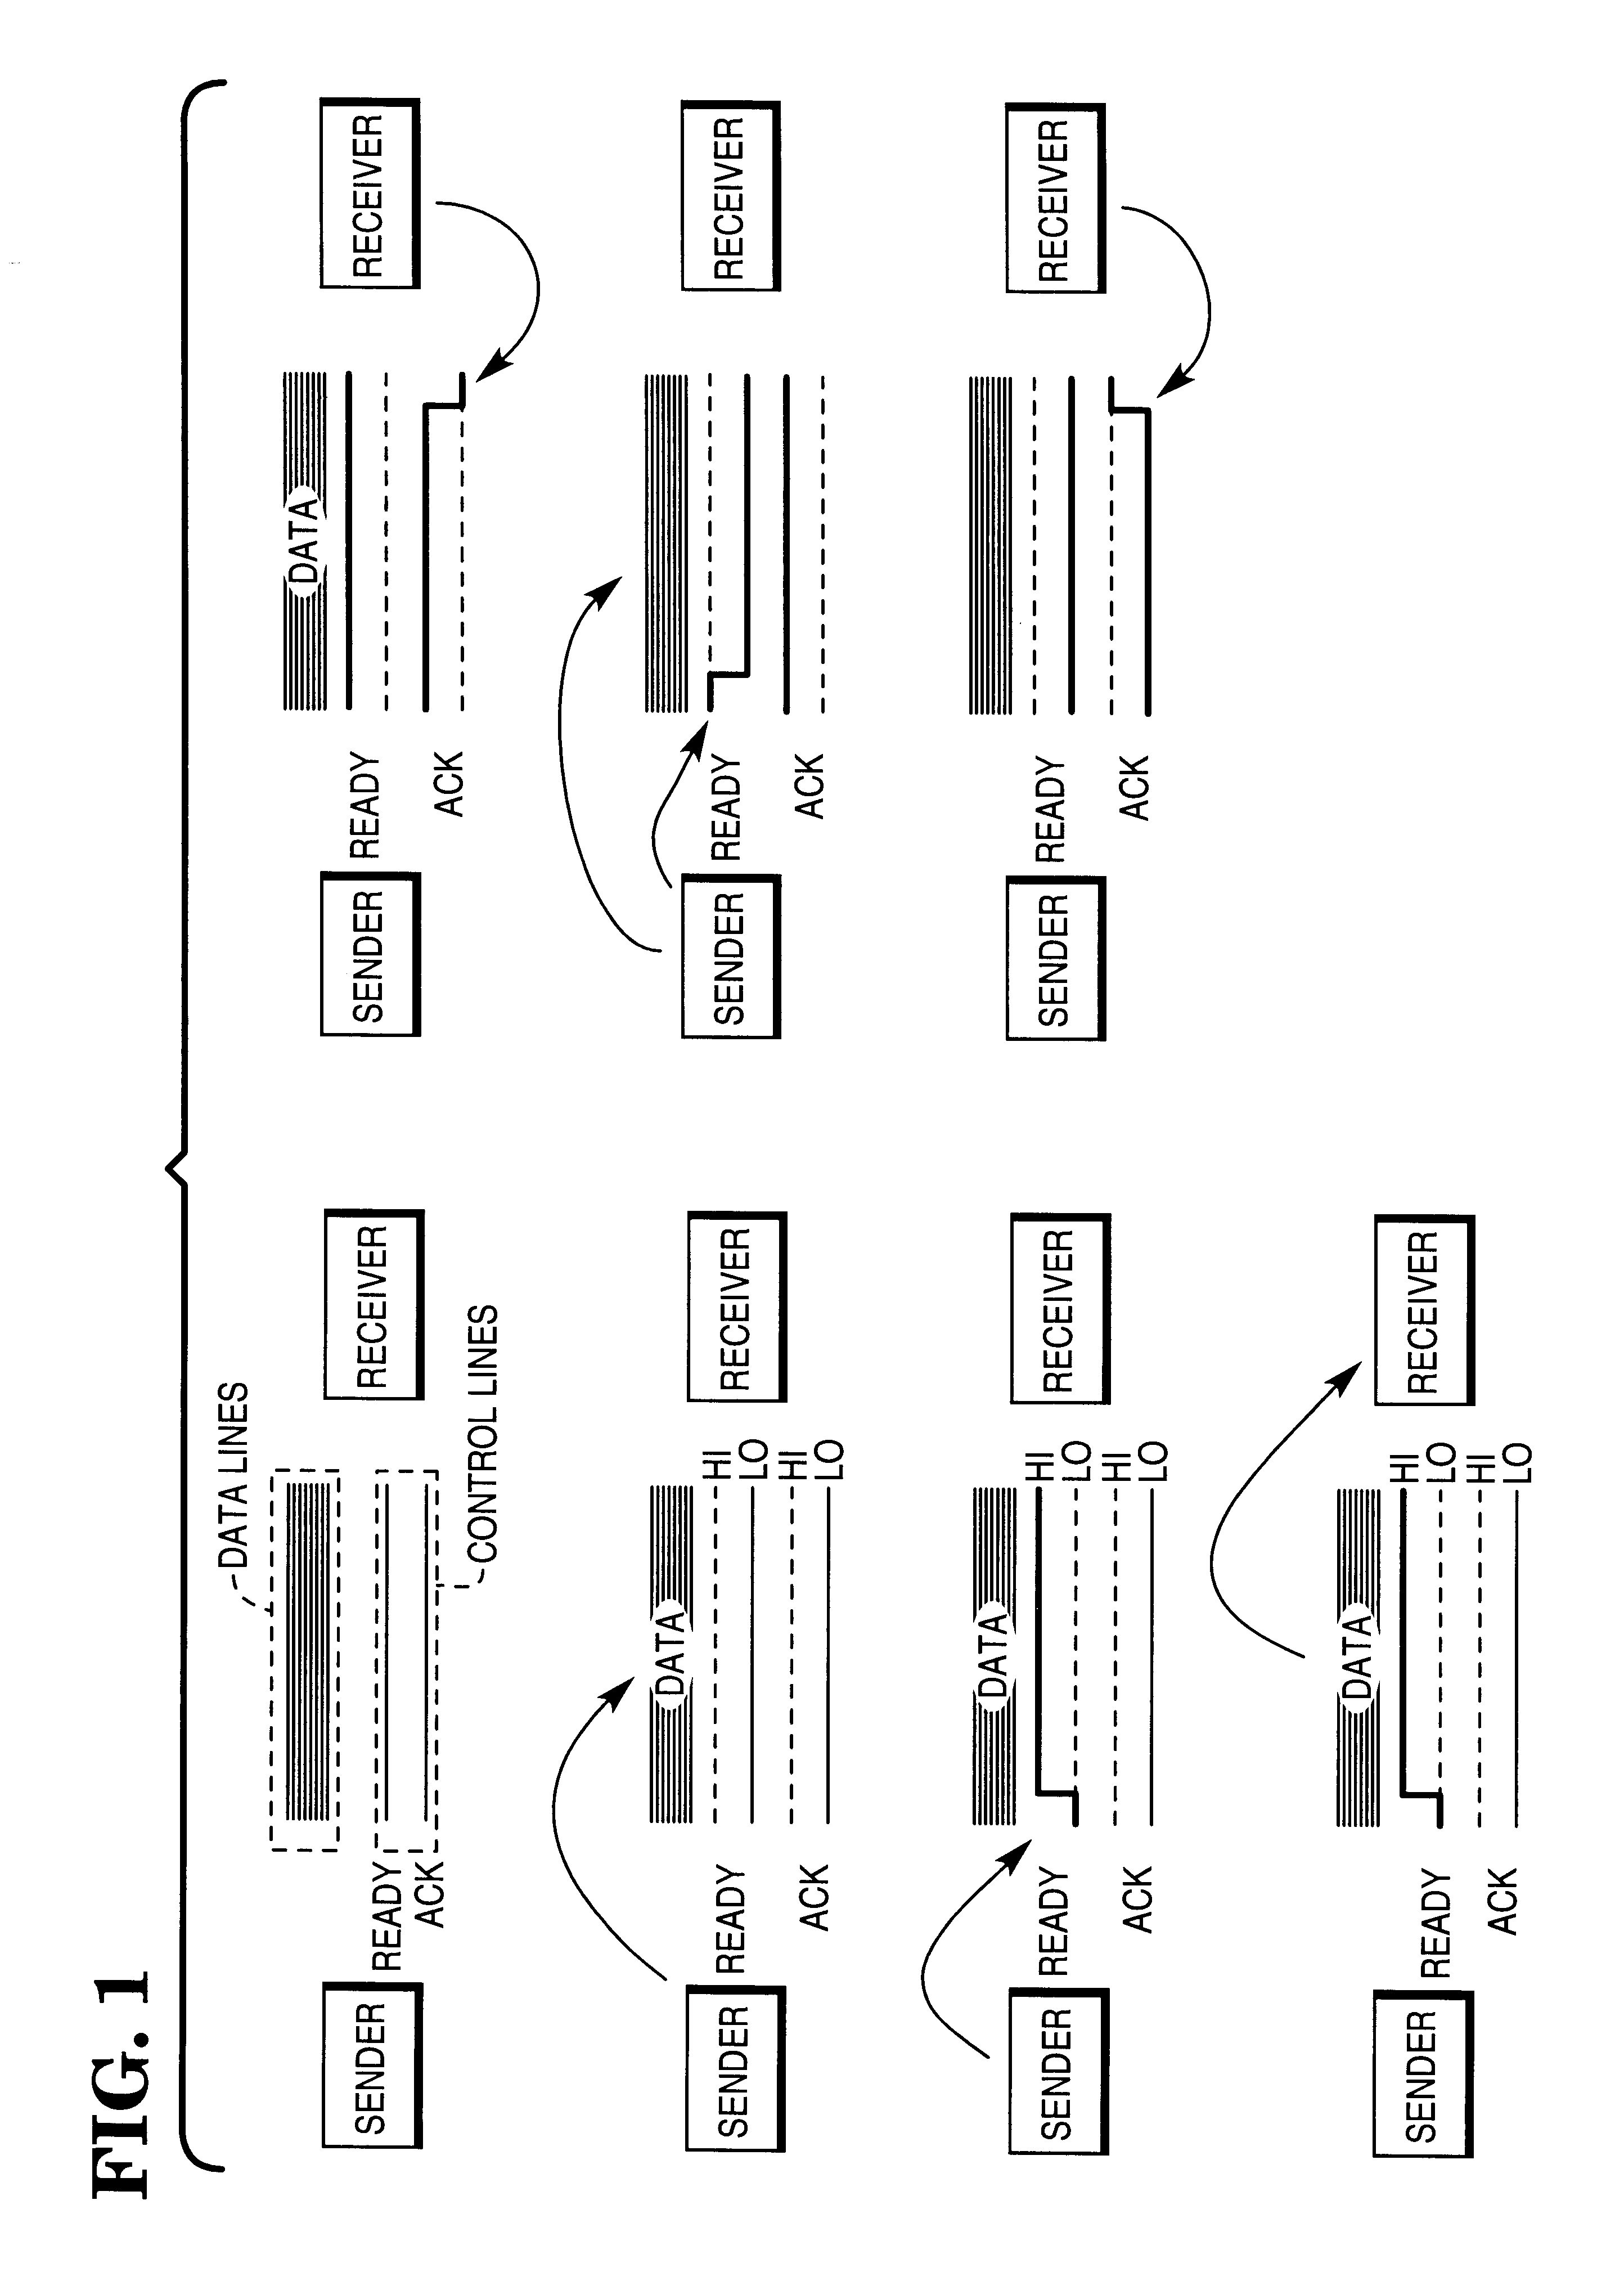 Tunable architecture for device adapter